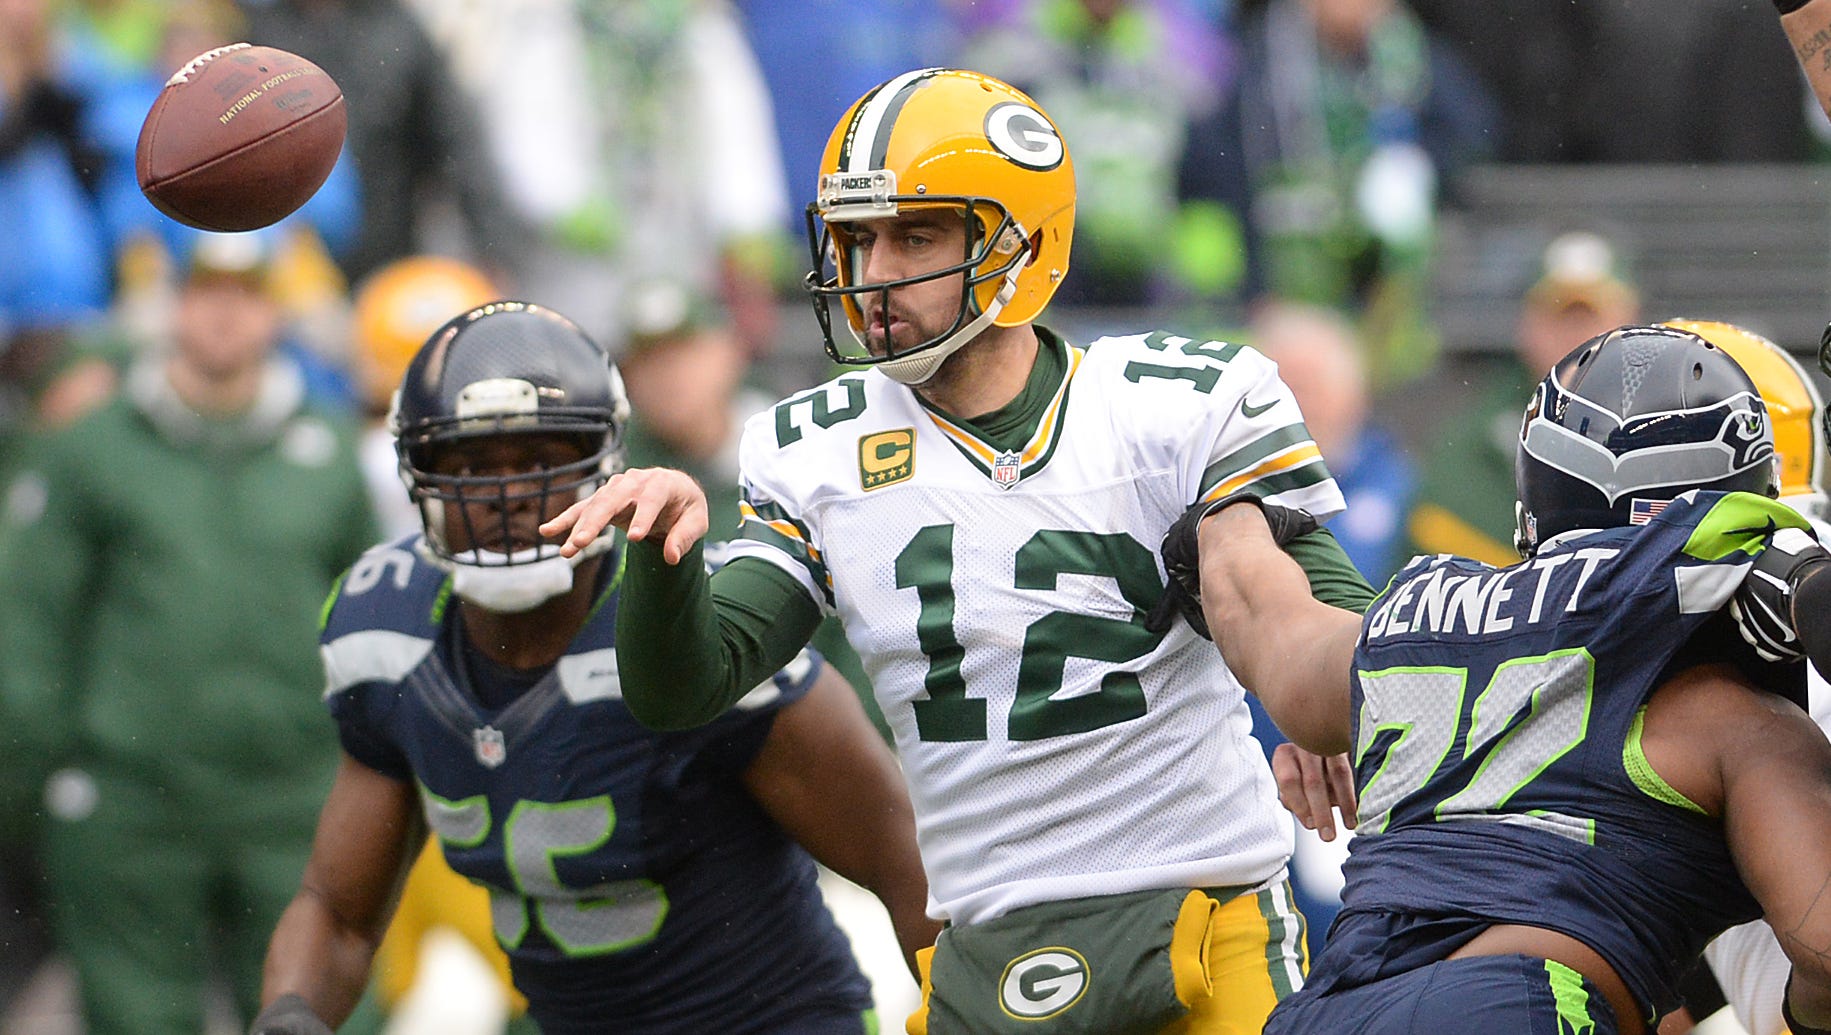 Green Bay Packers quarterback Aaron Rodgers flips a short pass that would fall incomplete under heay pressure against the Seattle Seahawks at CenturyLink FIeld in Seattle January 18, 2015.